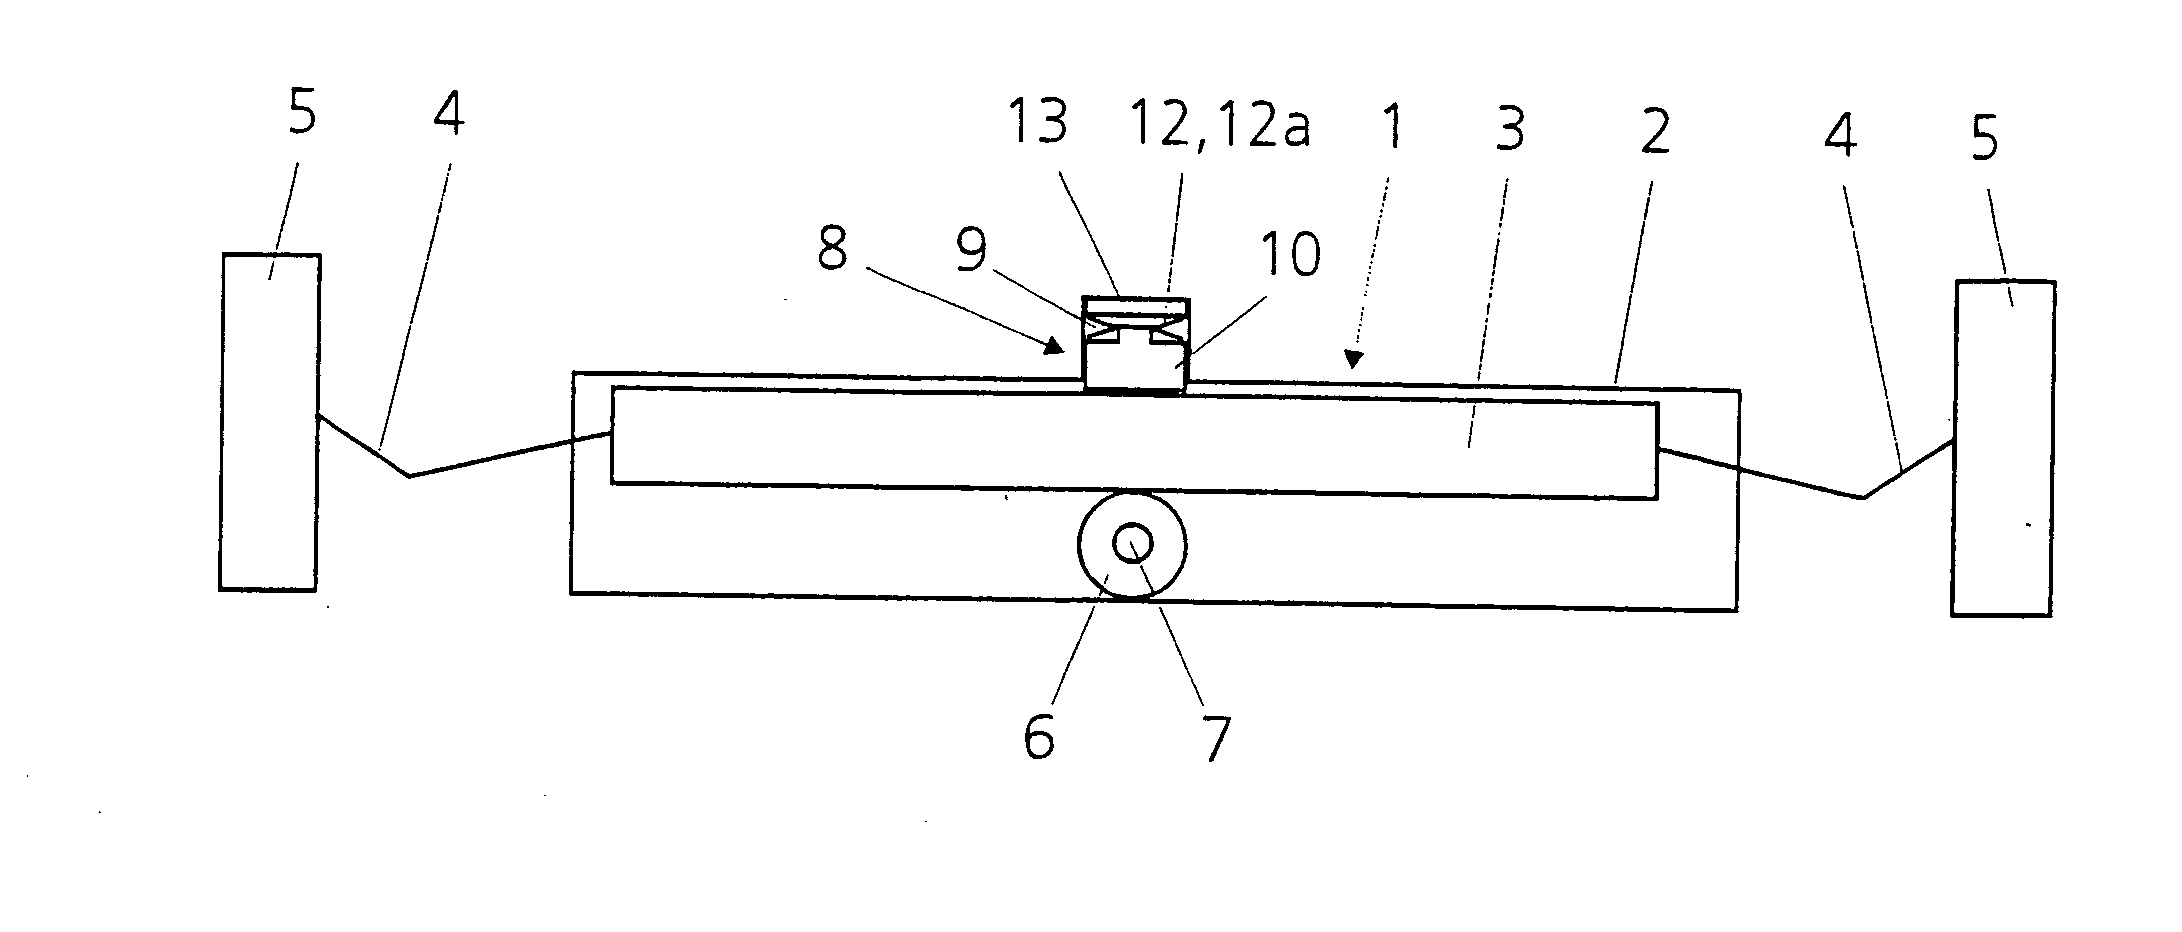 Device for pressing a gear rack against a pinion meshing with the gear rack